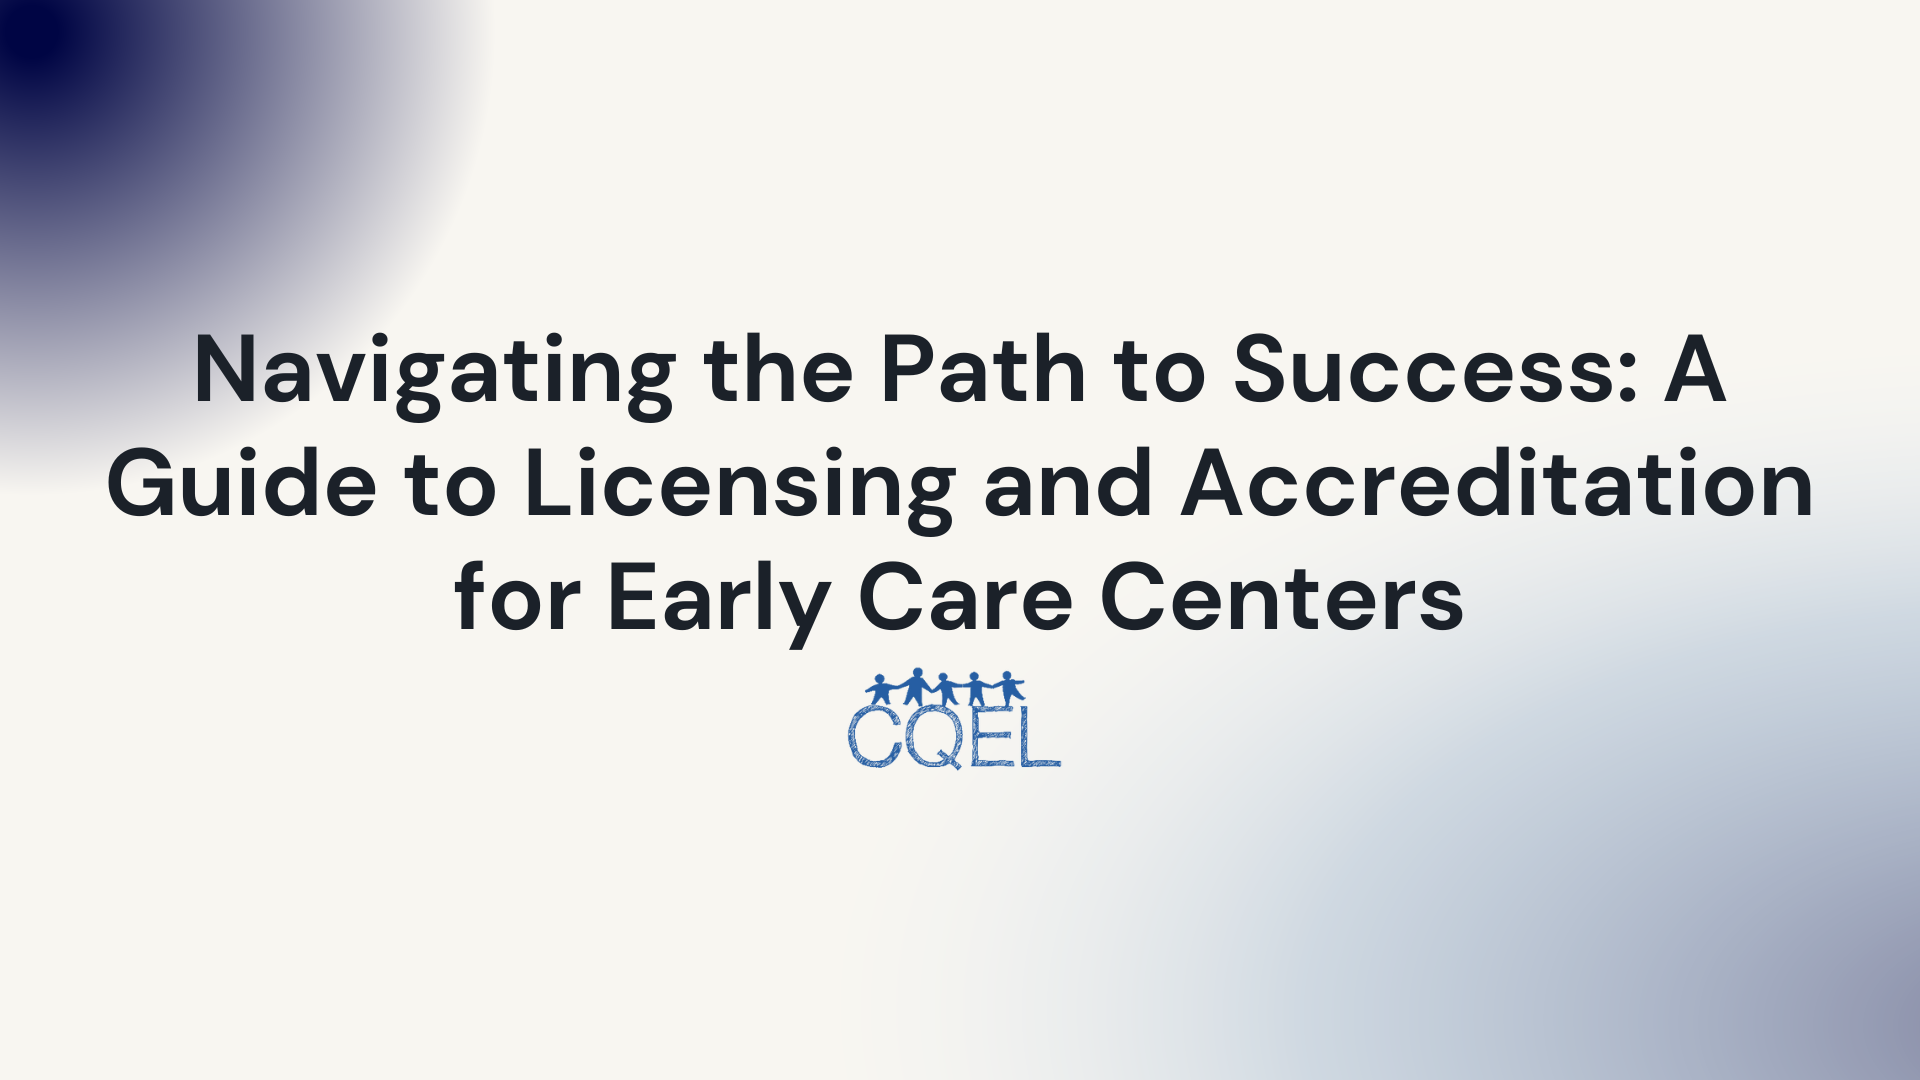 Navigating the Path to Success: A Guide to Licensing and Accreditation for Early Care Centers